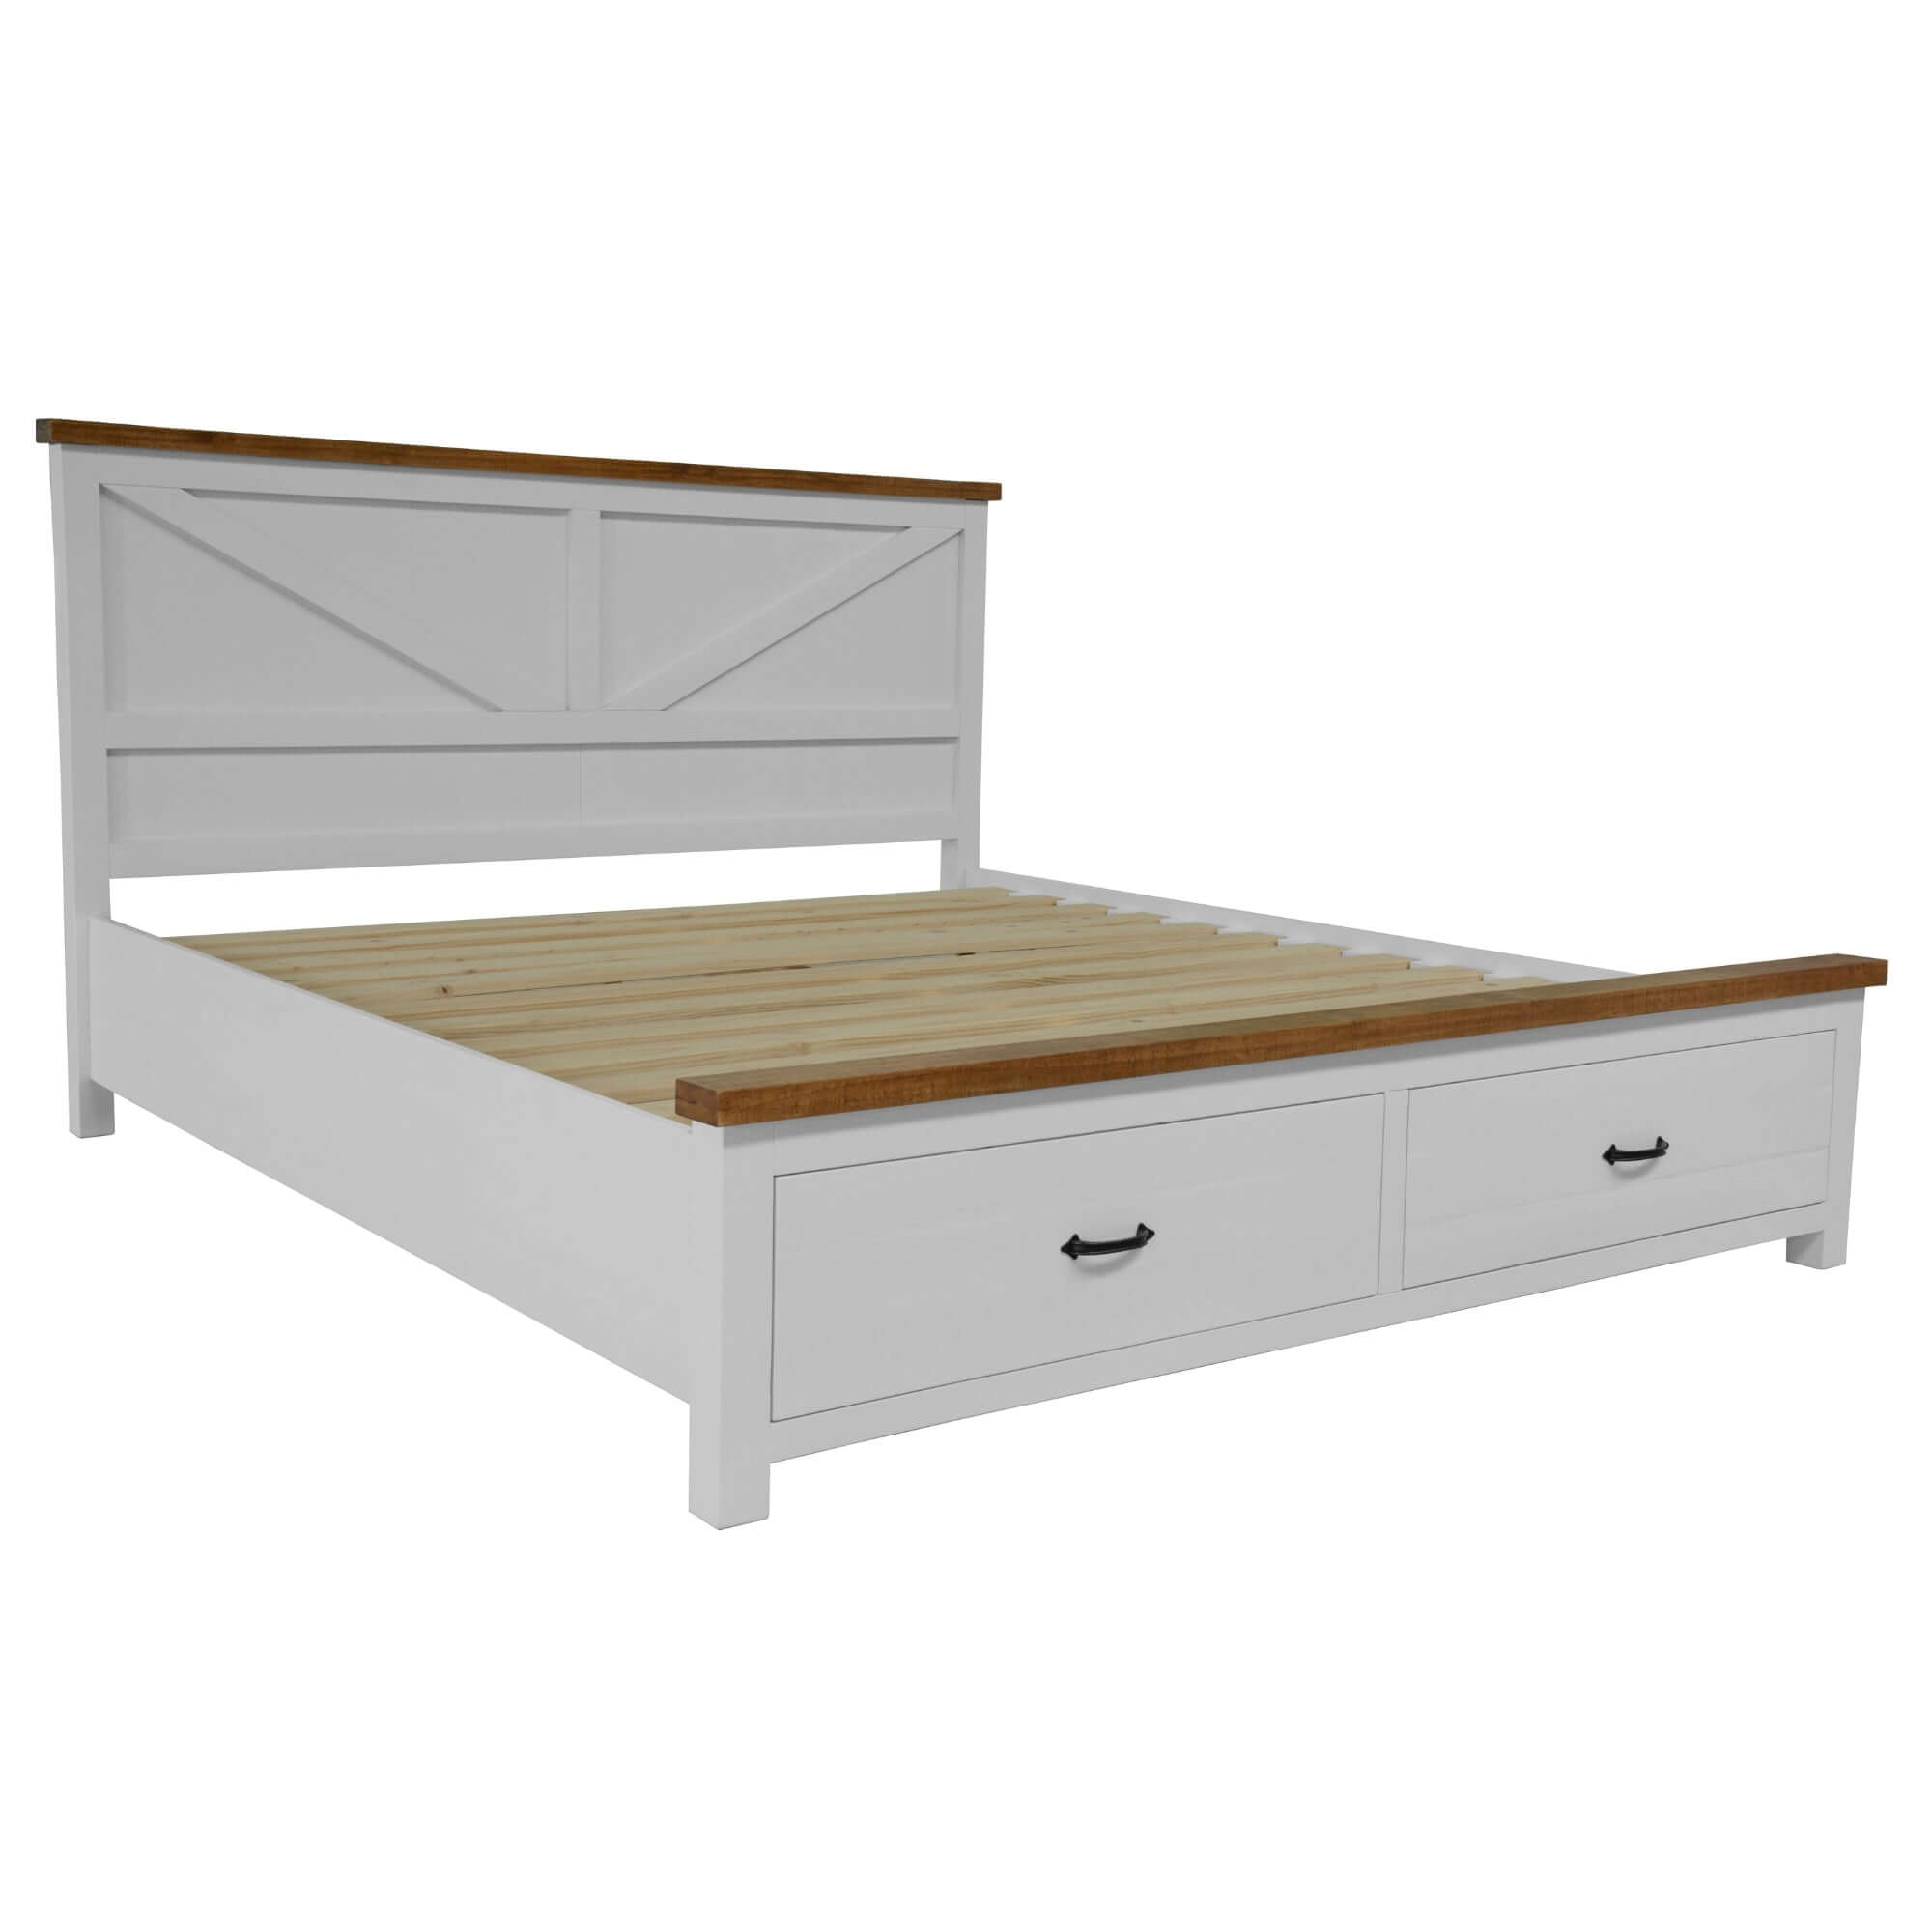 Grandy King Bed Frame with Storage Drawers-Upinteriors